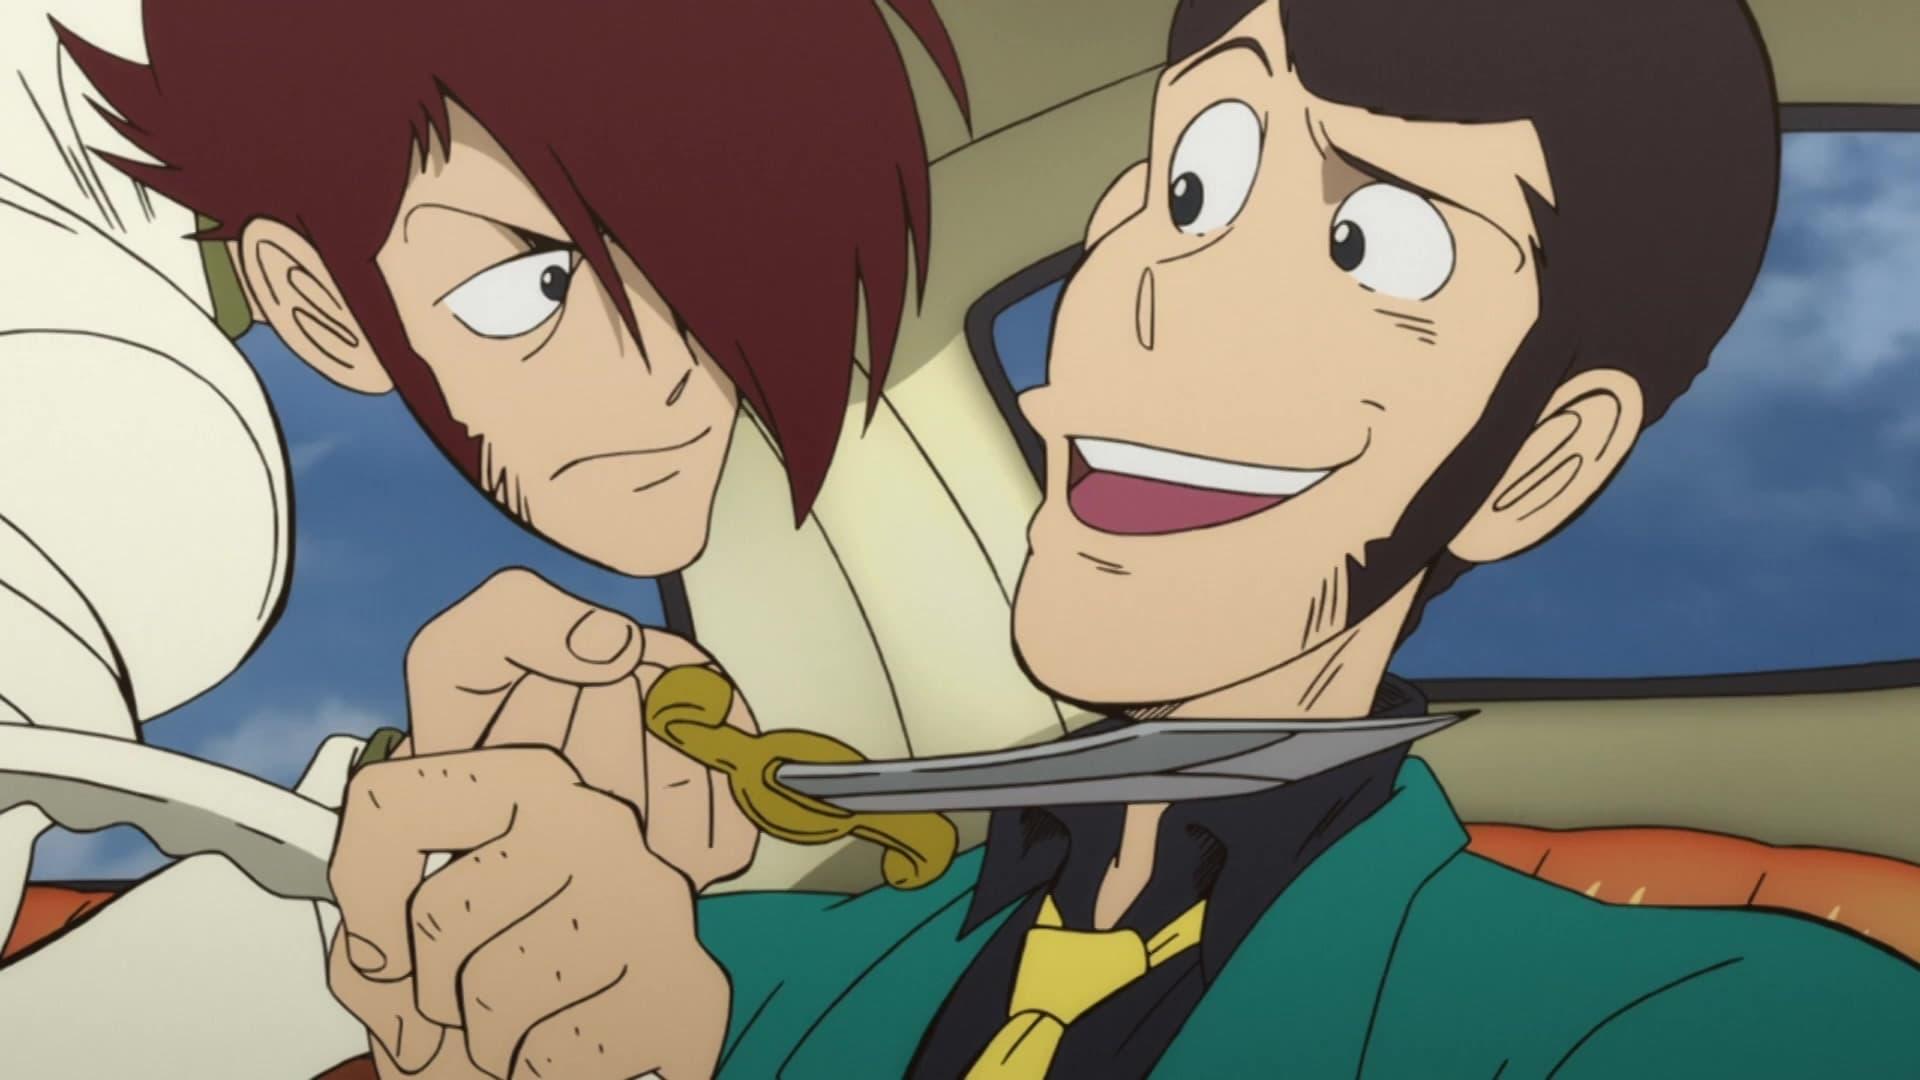 Lupin the Third: Is Lupin Still Burning? backdrop